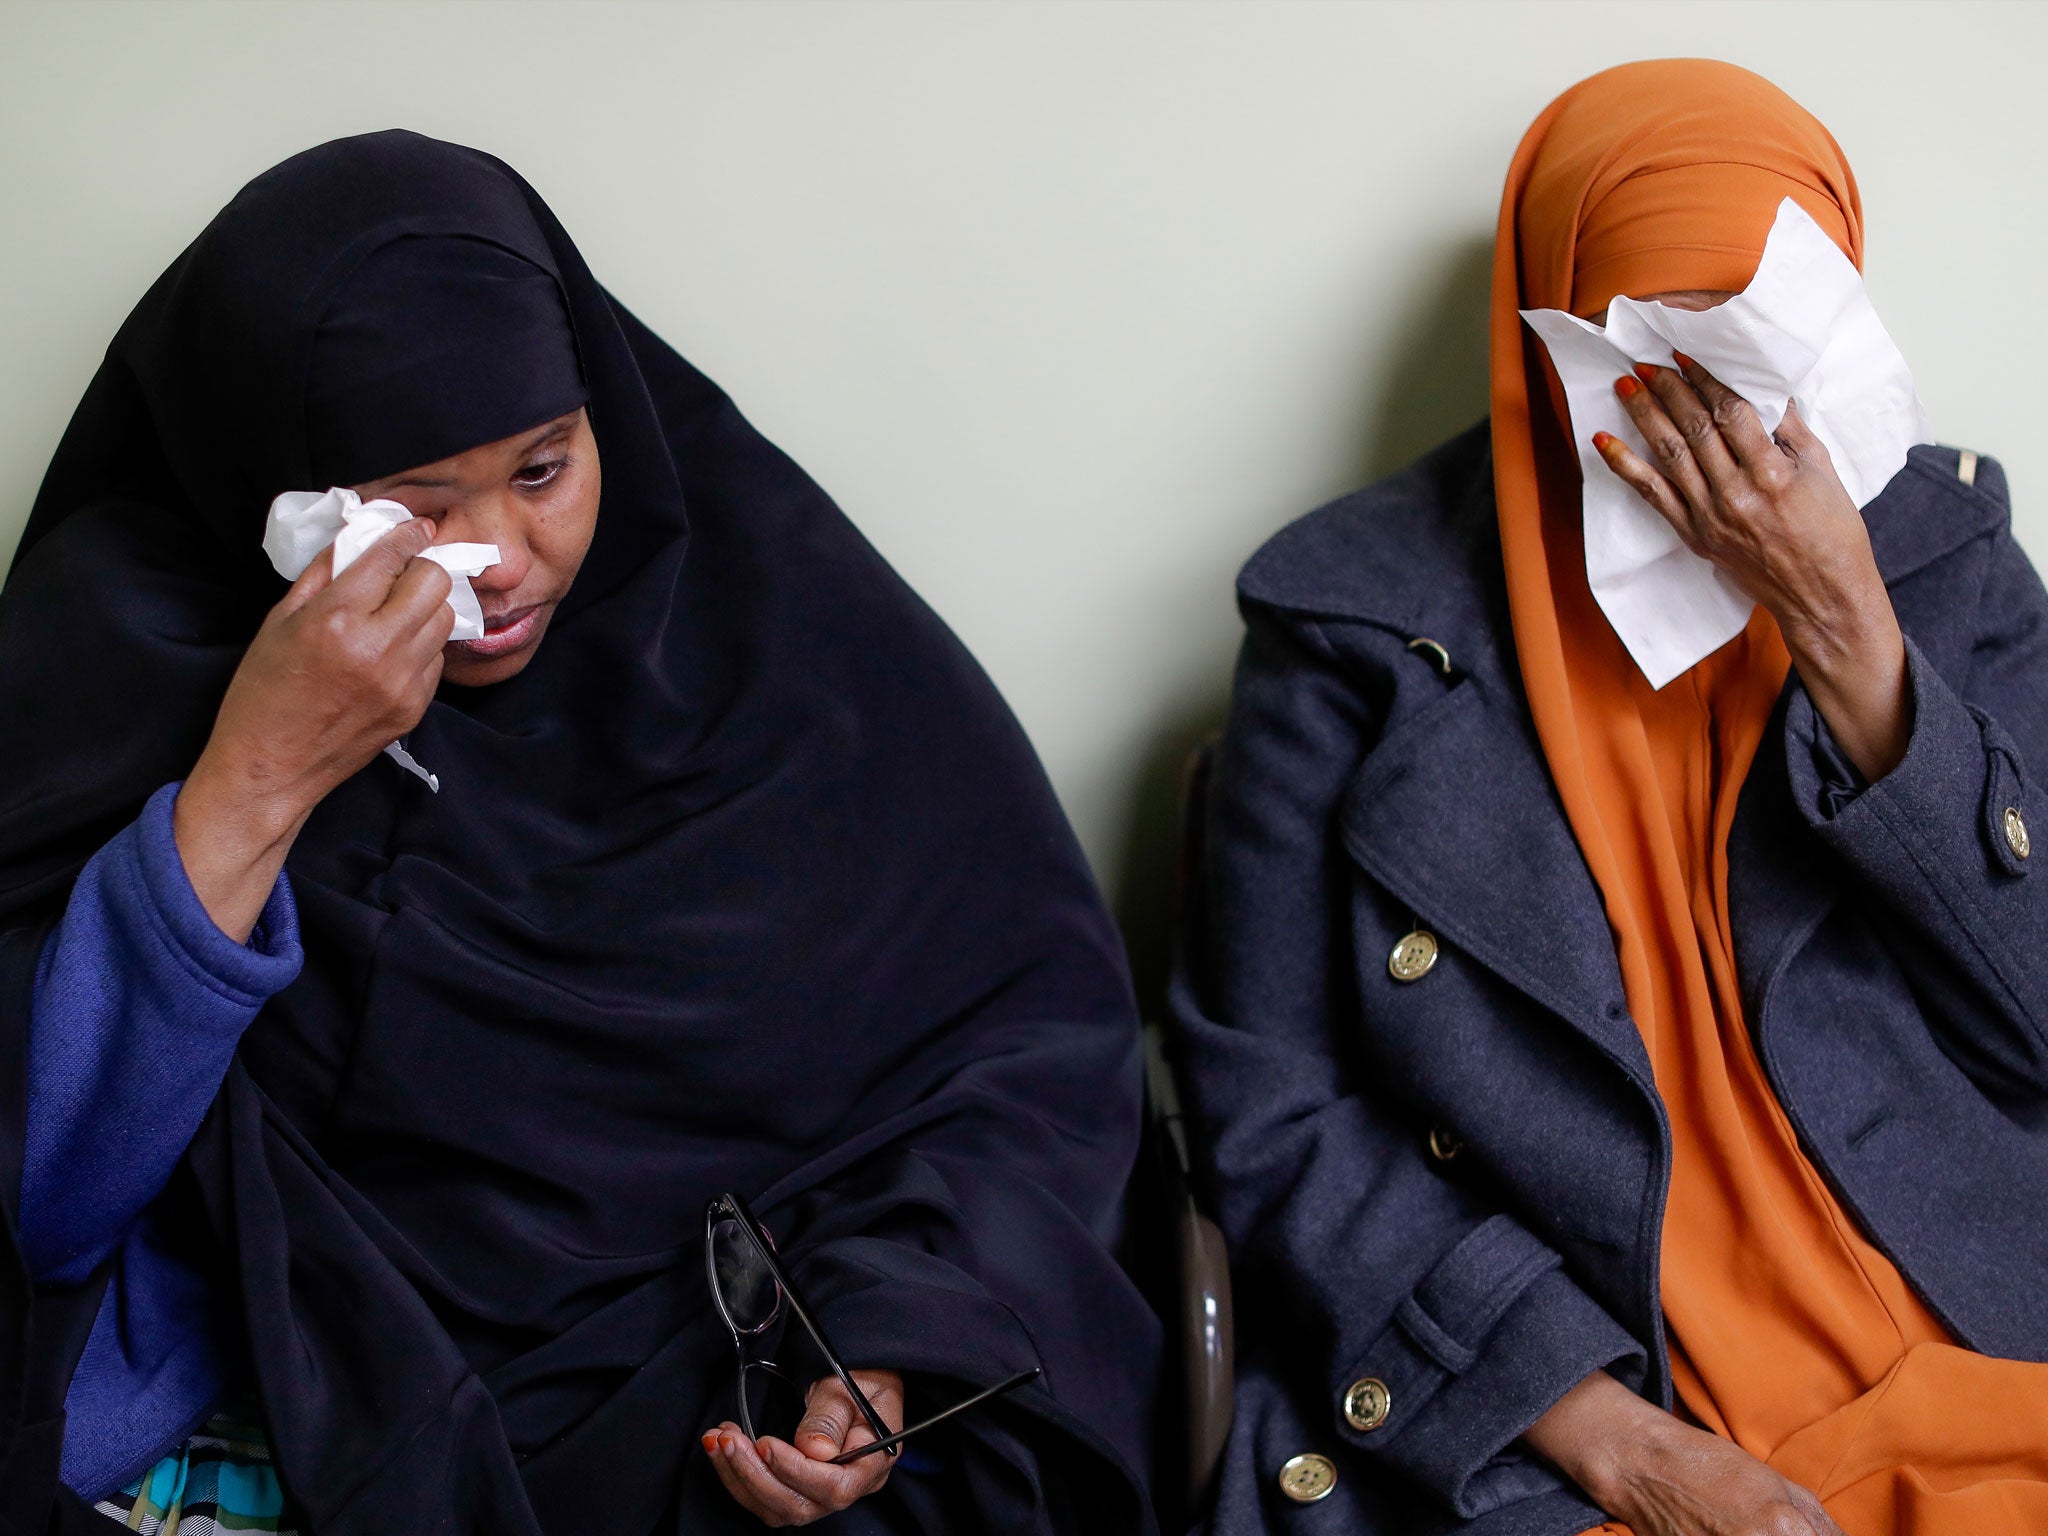 Somali refugees wipe away tears during an interview at the Community Refugee & Immigration Services offices in Ohio